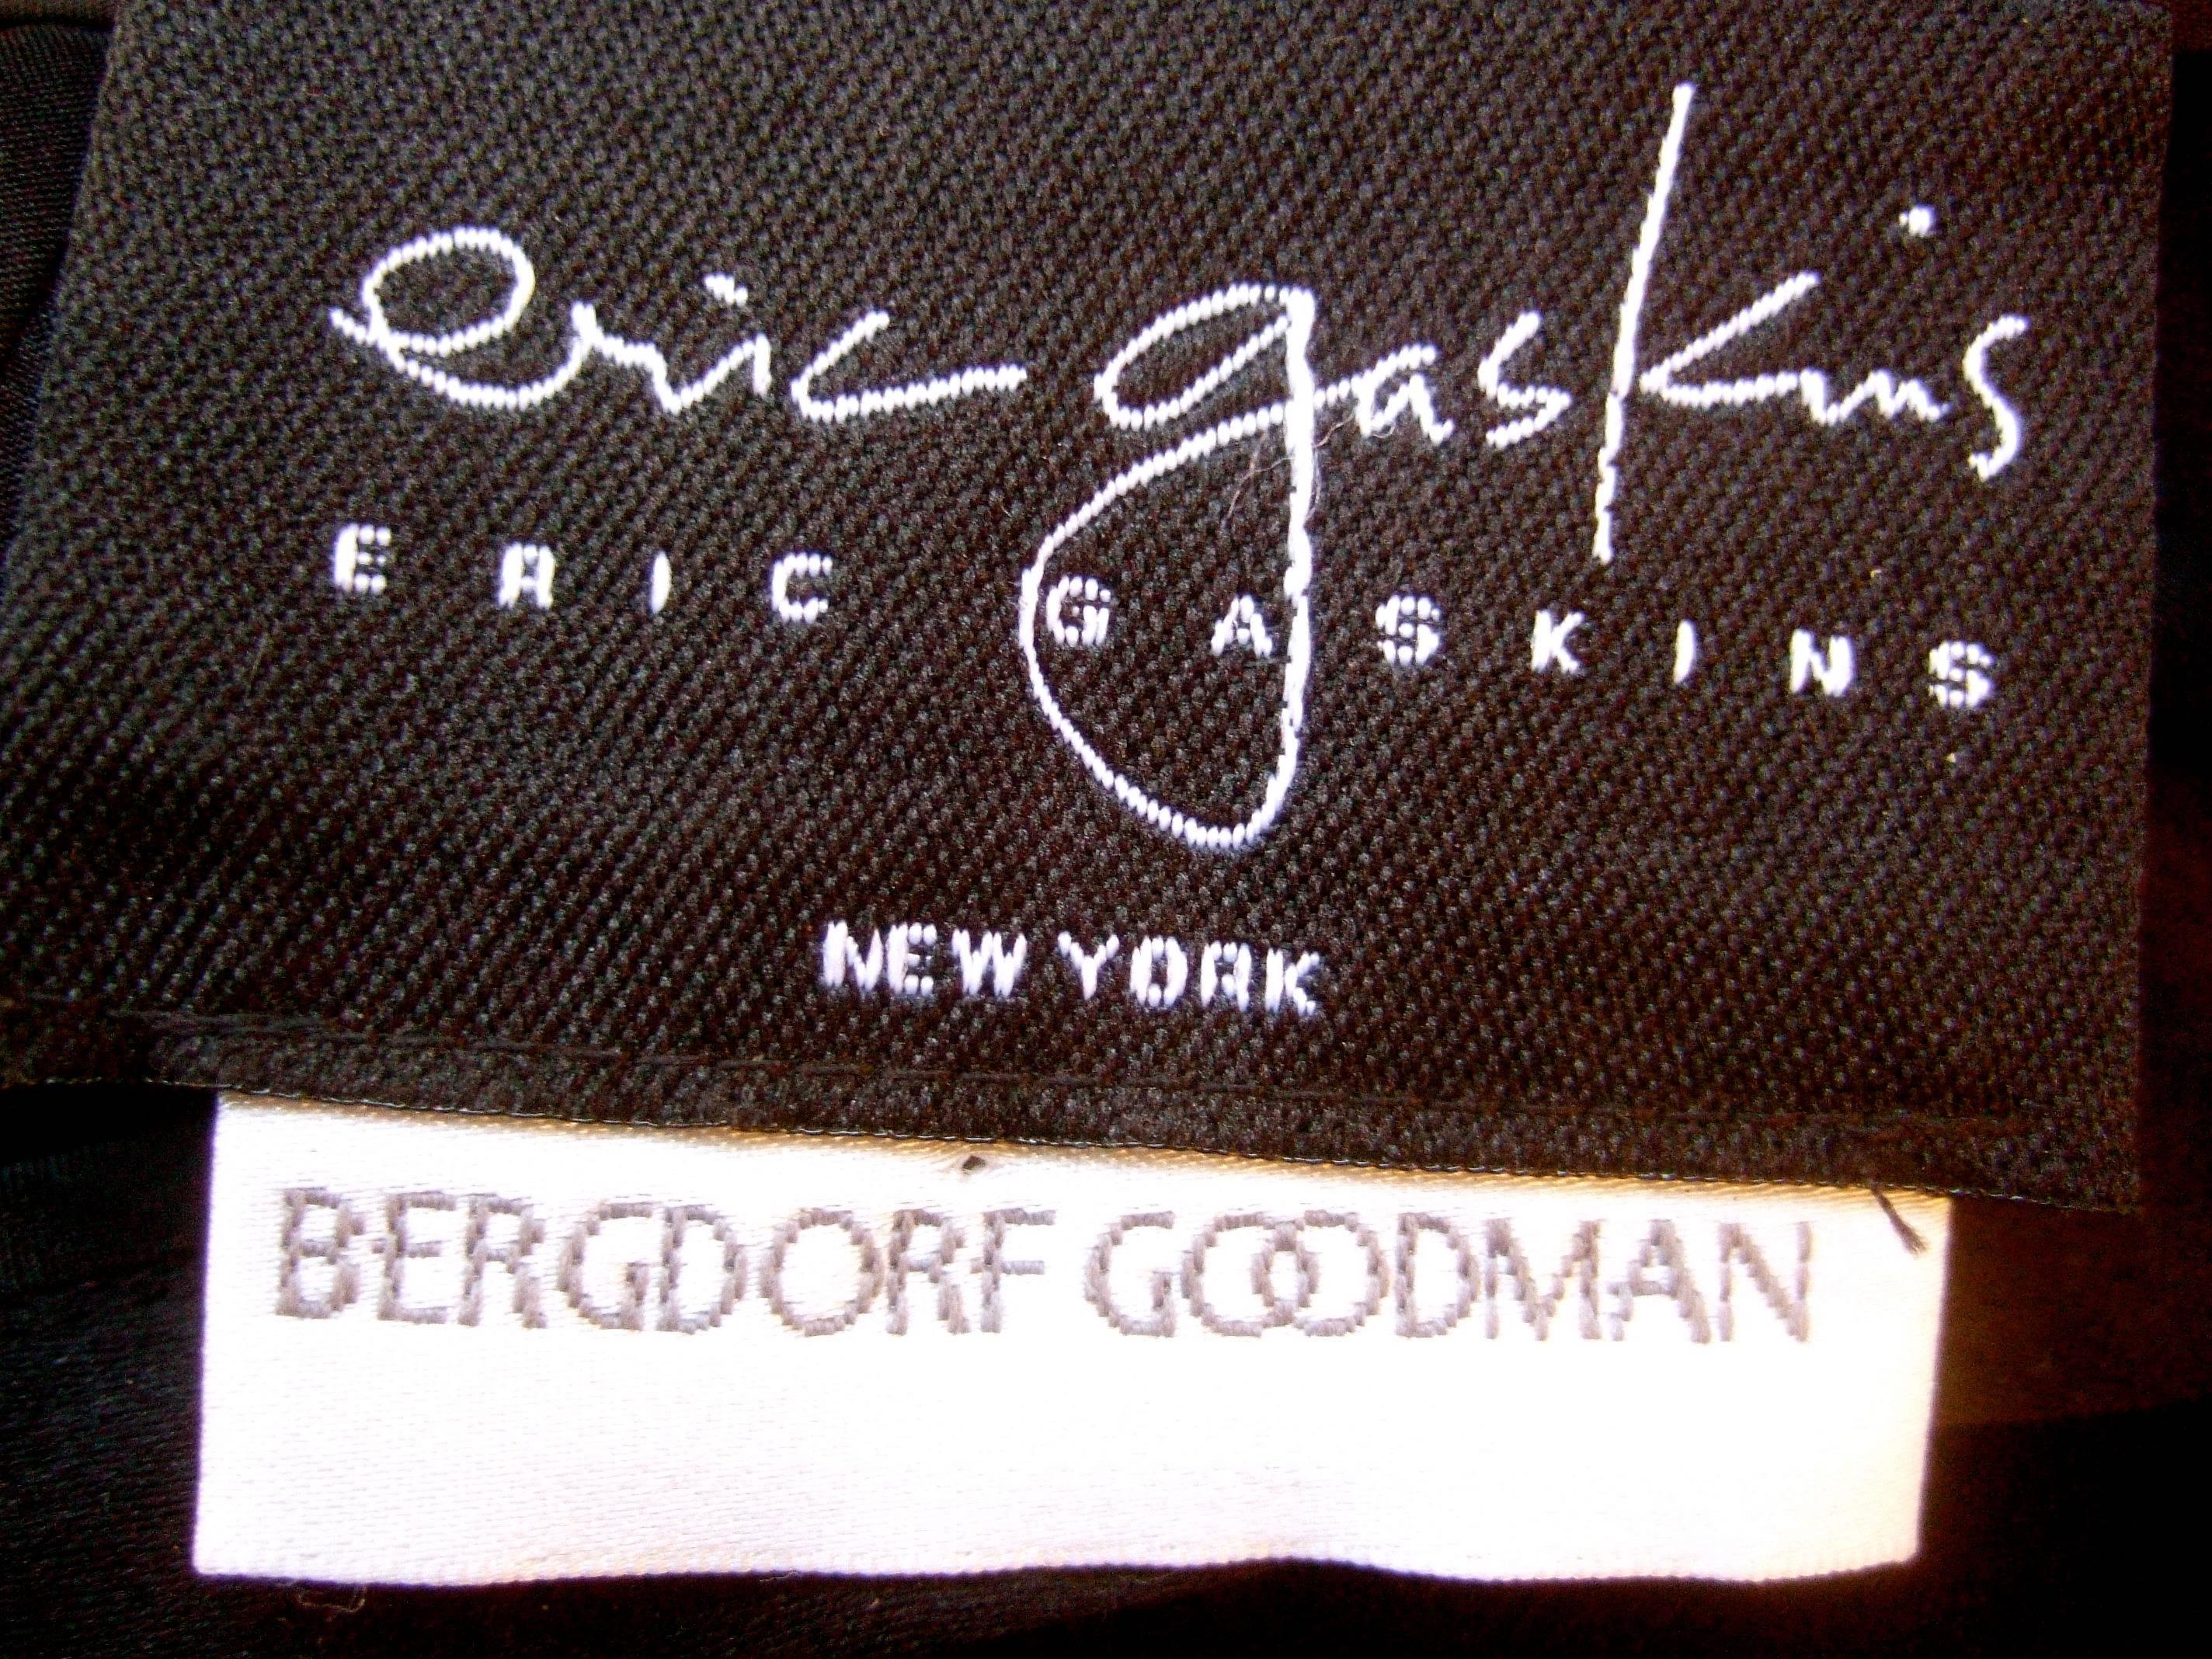 Black long silk velvet maxi skirt from Bergdorf Goodman by Eric Gaskins 
The elegant silk velvet maxi skirt has a luminous silvery sheen 
The luxurious textured fabric is plush and soft 

A thin black satin band circles the waistline 
Lined in black